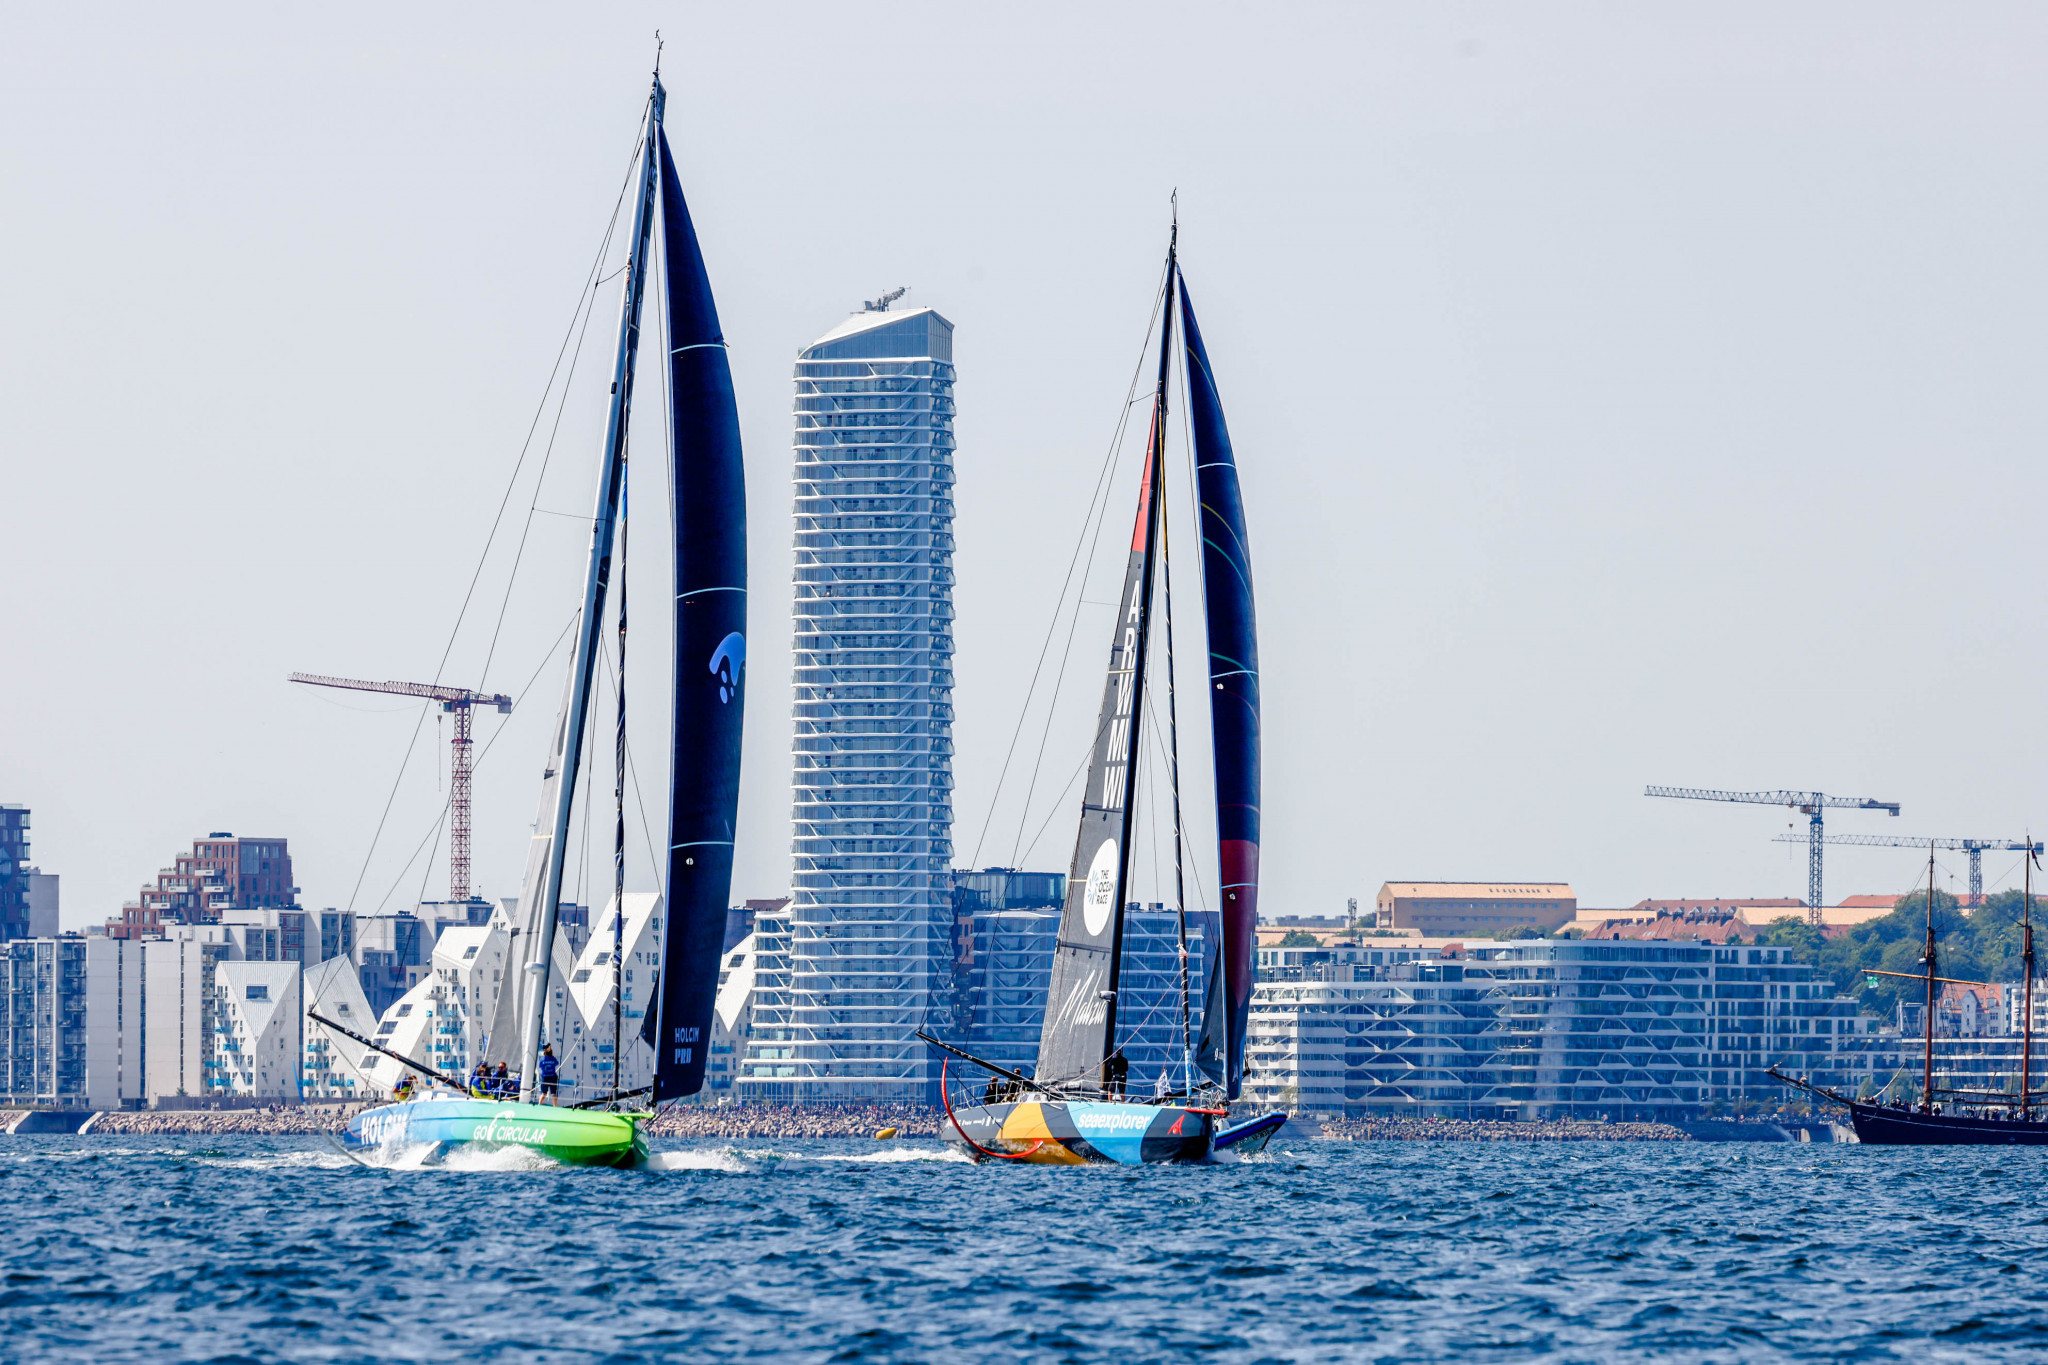 After Aarhus, the crews will go to The Hague in The Netherlands before the final leg to Genova in Italy, where the VO65 and IMOCA titles are expected to be decided ©The Ocean Race